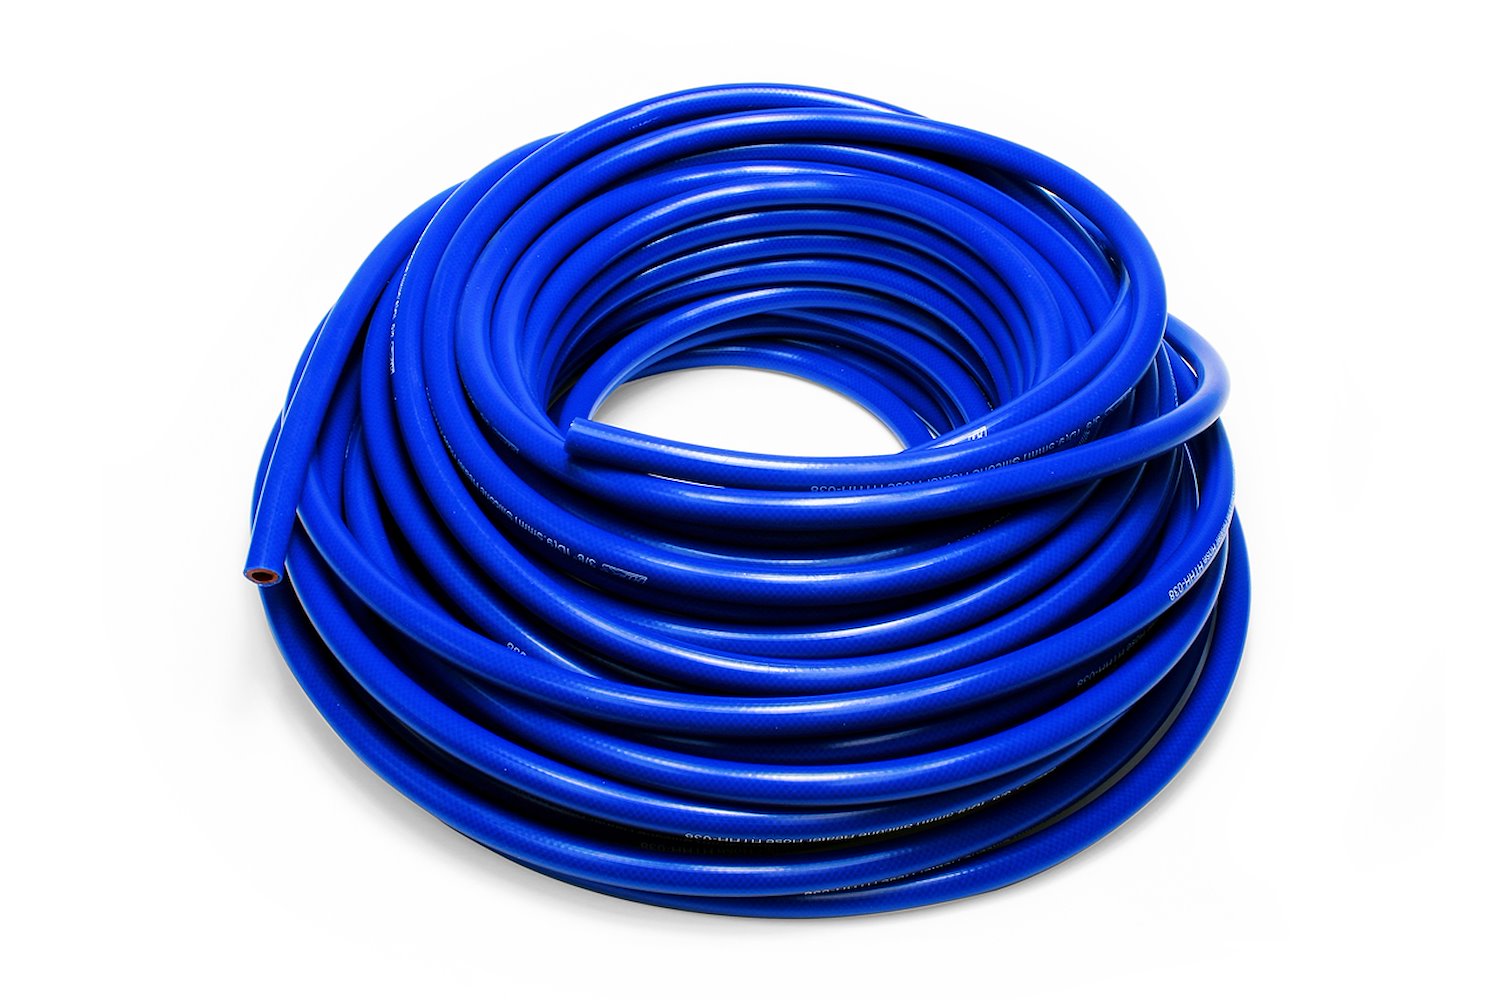 HTHH-050-BLUEx100 Silicone Heater Hose Tubing, High-Temp Reinforced, 1/2 in. ID, 100 ft. Roll, Blue